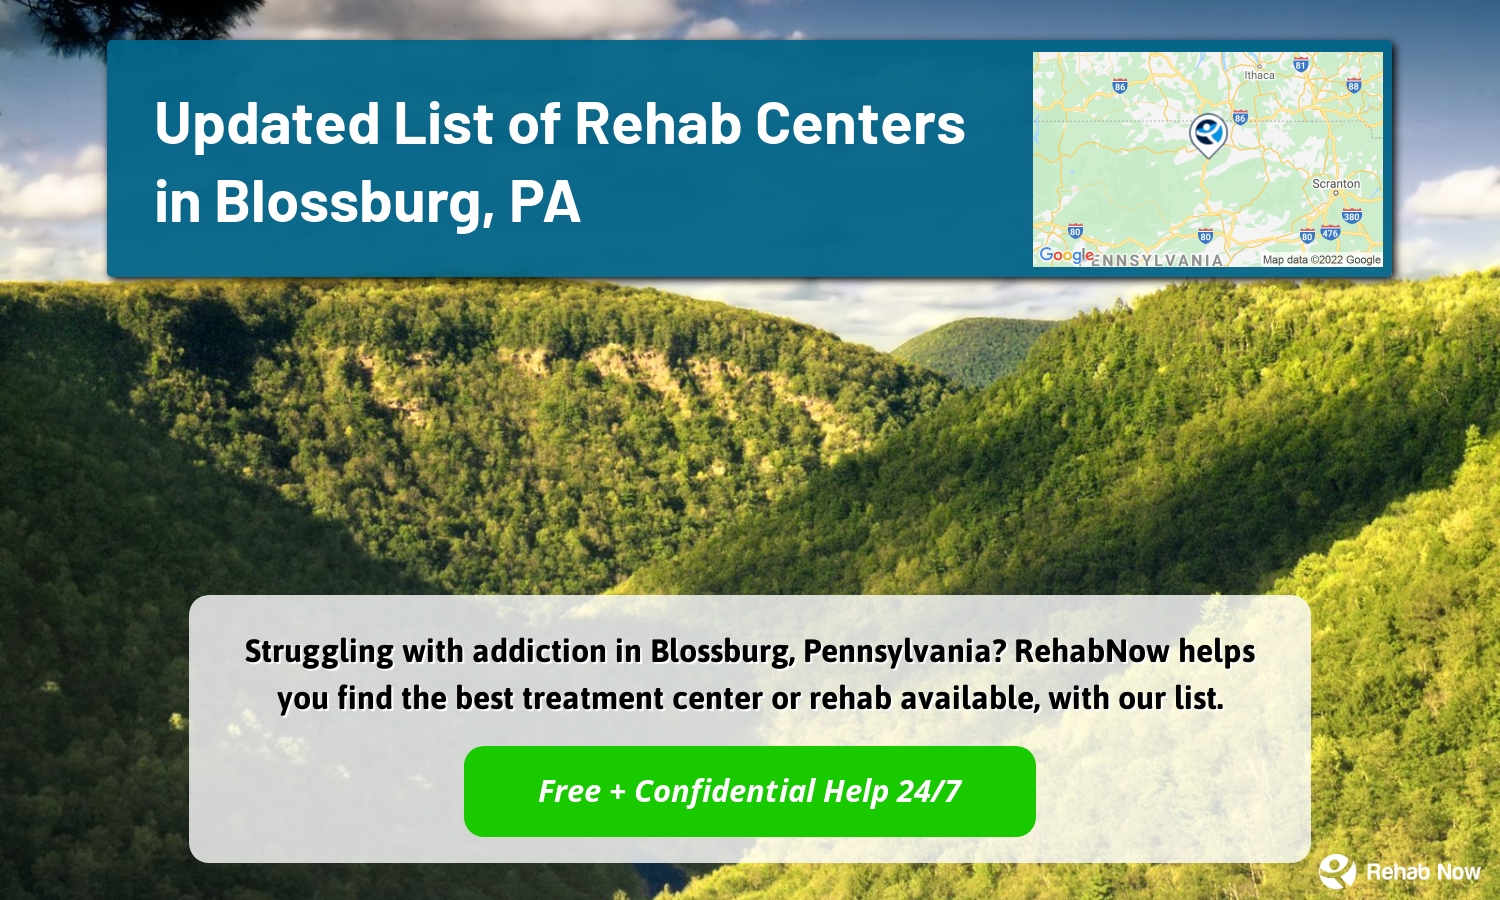 Struggling with addiction in Blossburg, Pennsylvania? RehabNow helps you find the best treatment center or rehab available, with our list.